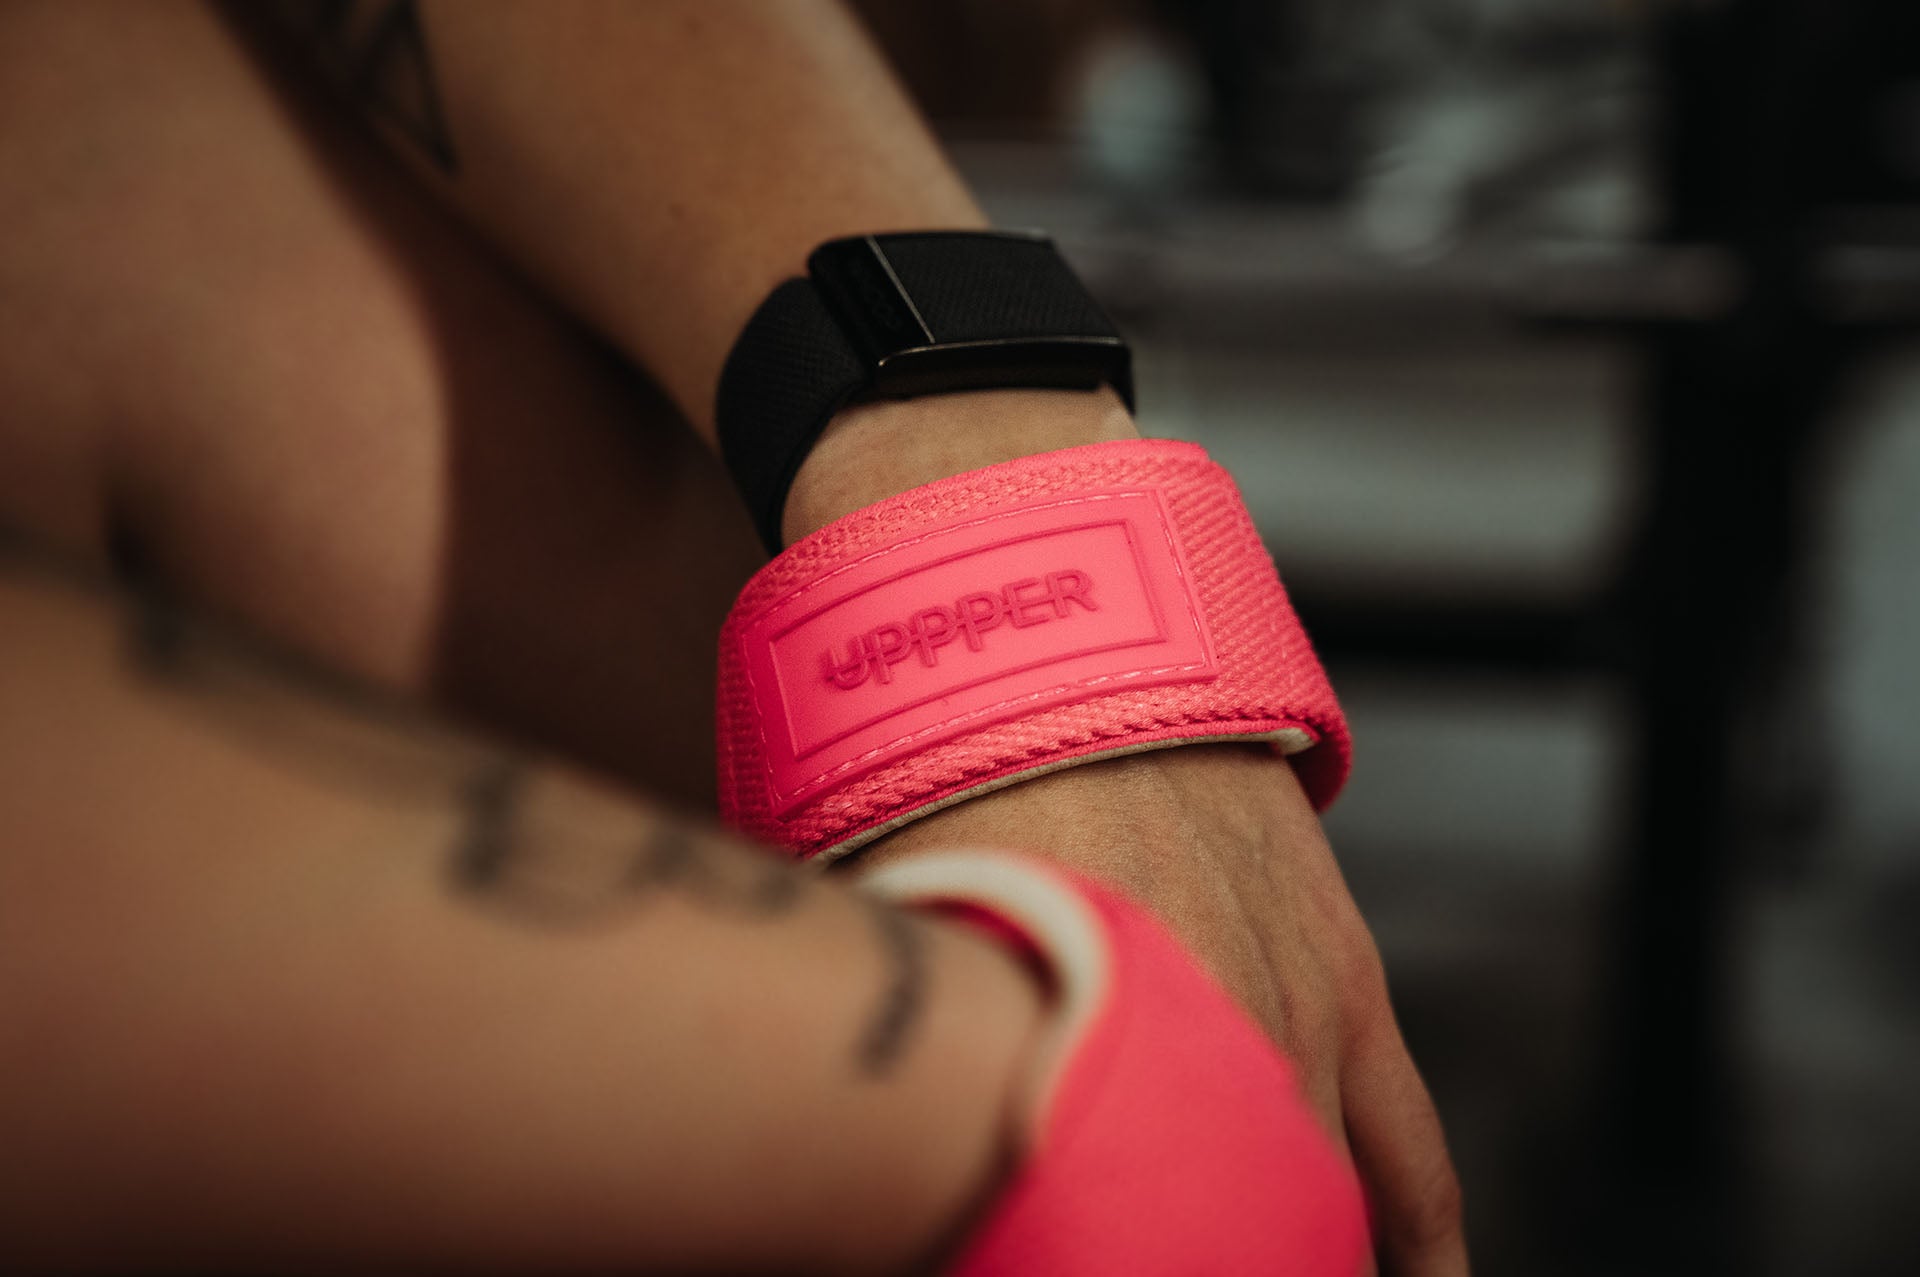 Wrist Wraps vs. Lifting Straps: Which Is Right for You? – SBD Apparel  Ireland